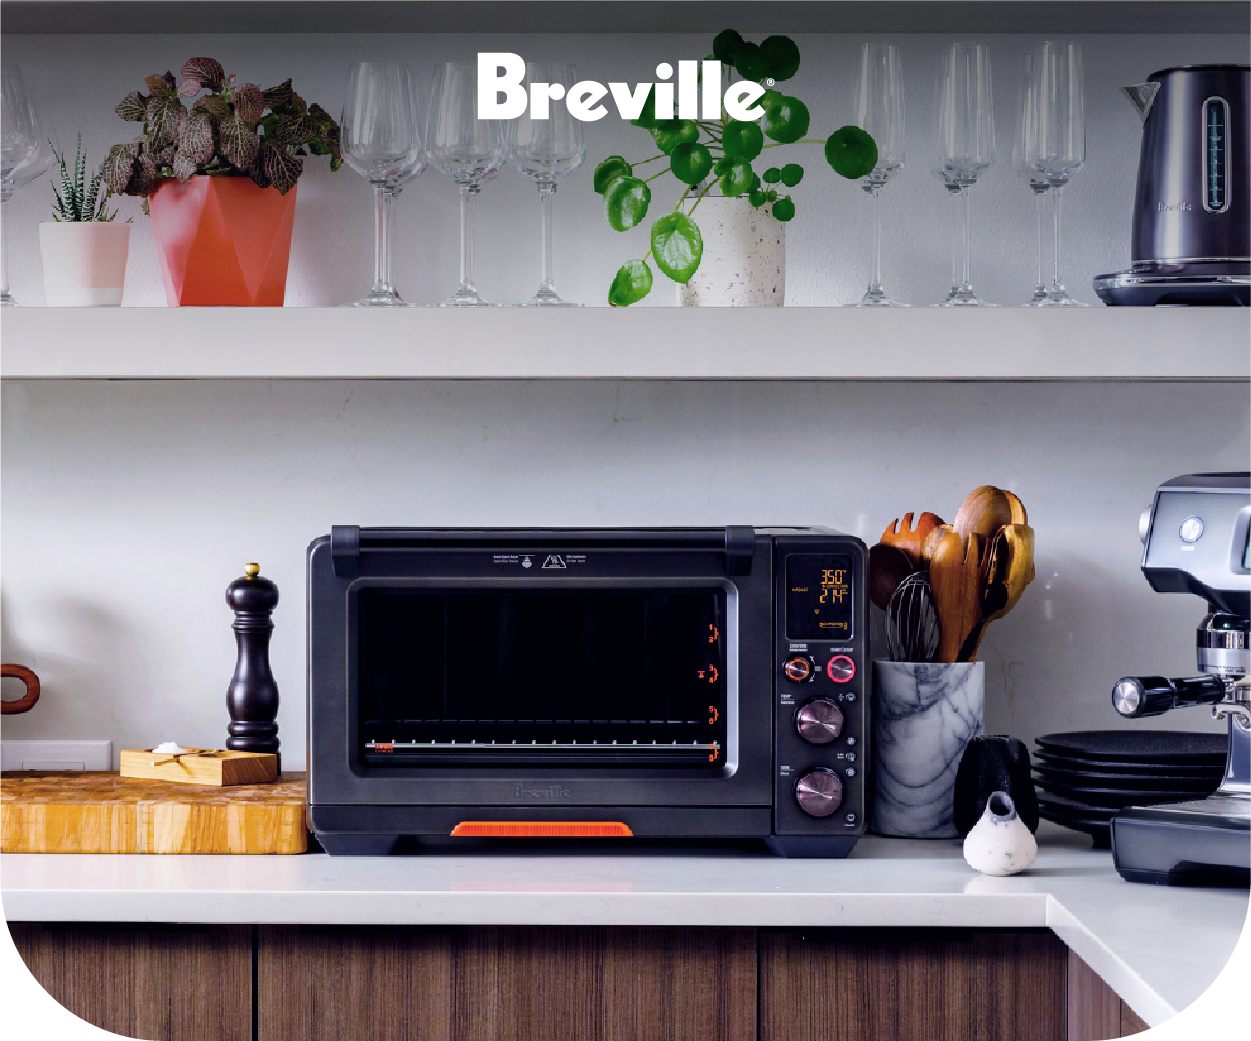 Breville Joule Black Stainless Steel Oven Air Fryer Pro